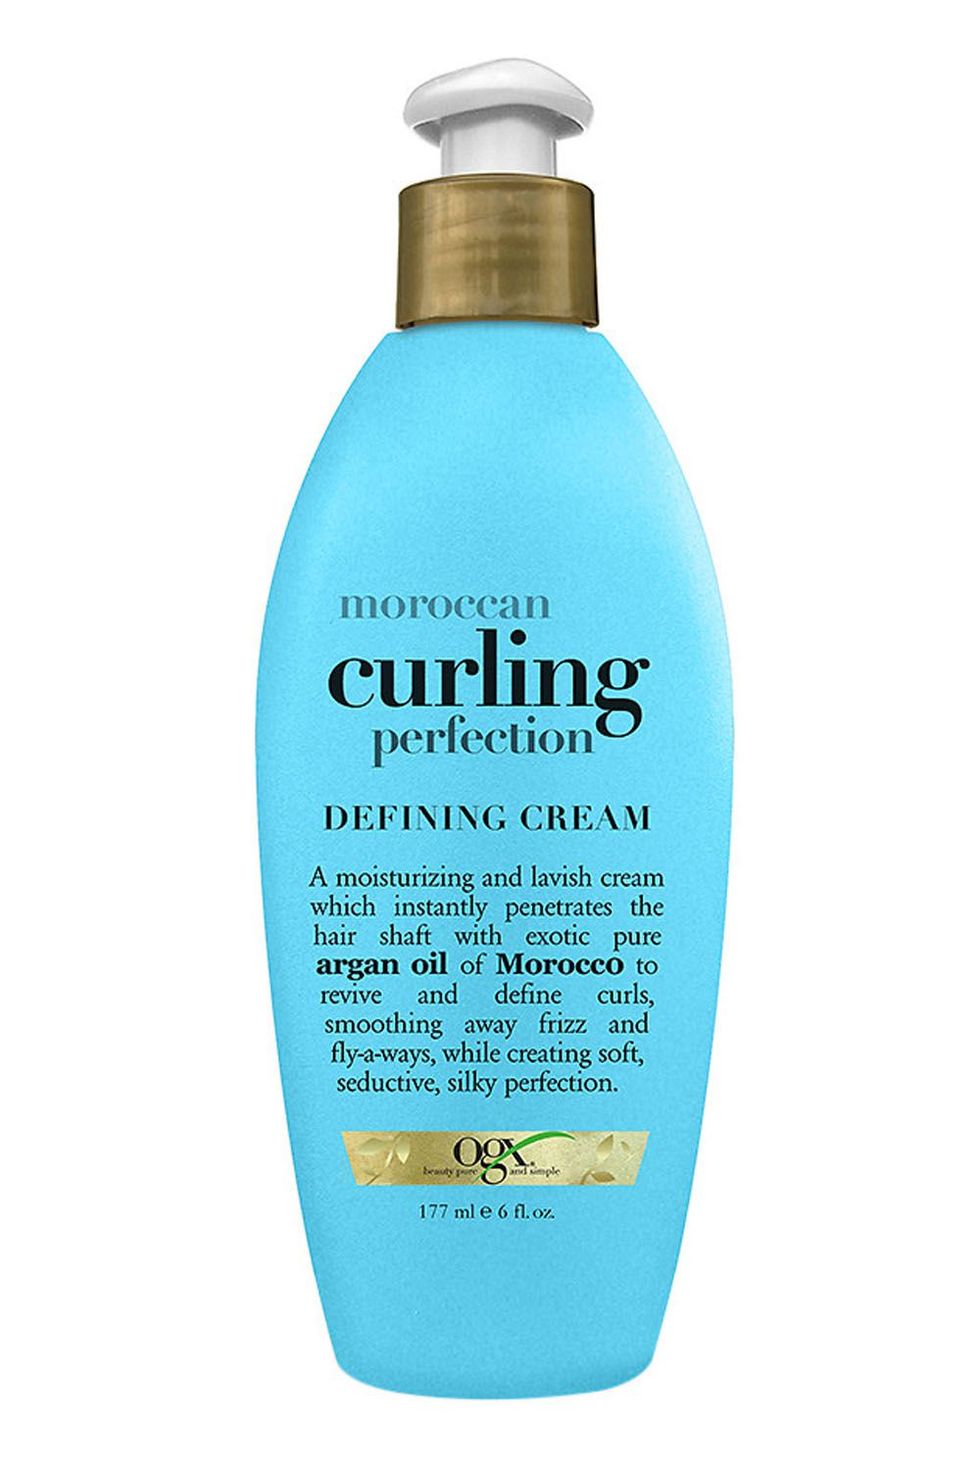 OGX Moroccan Curl Perfection Defining Cream